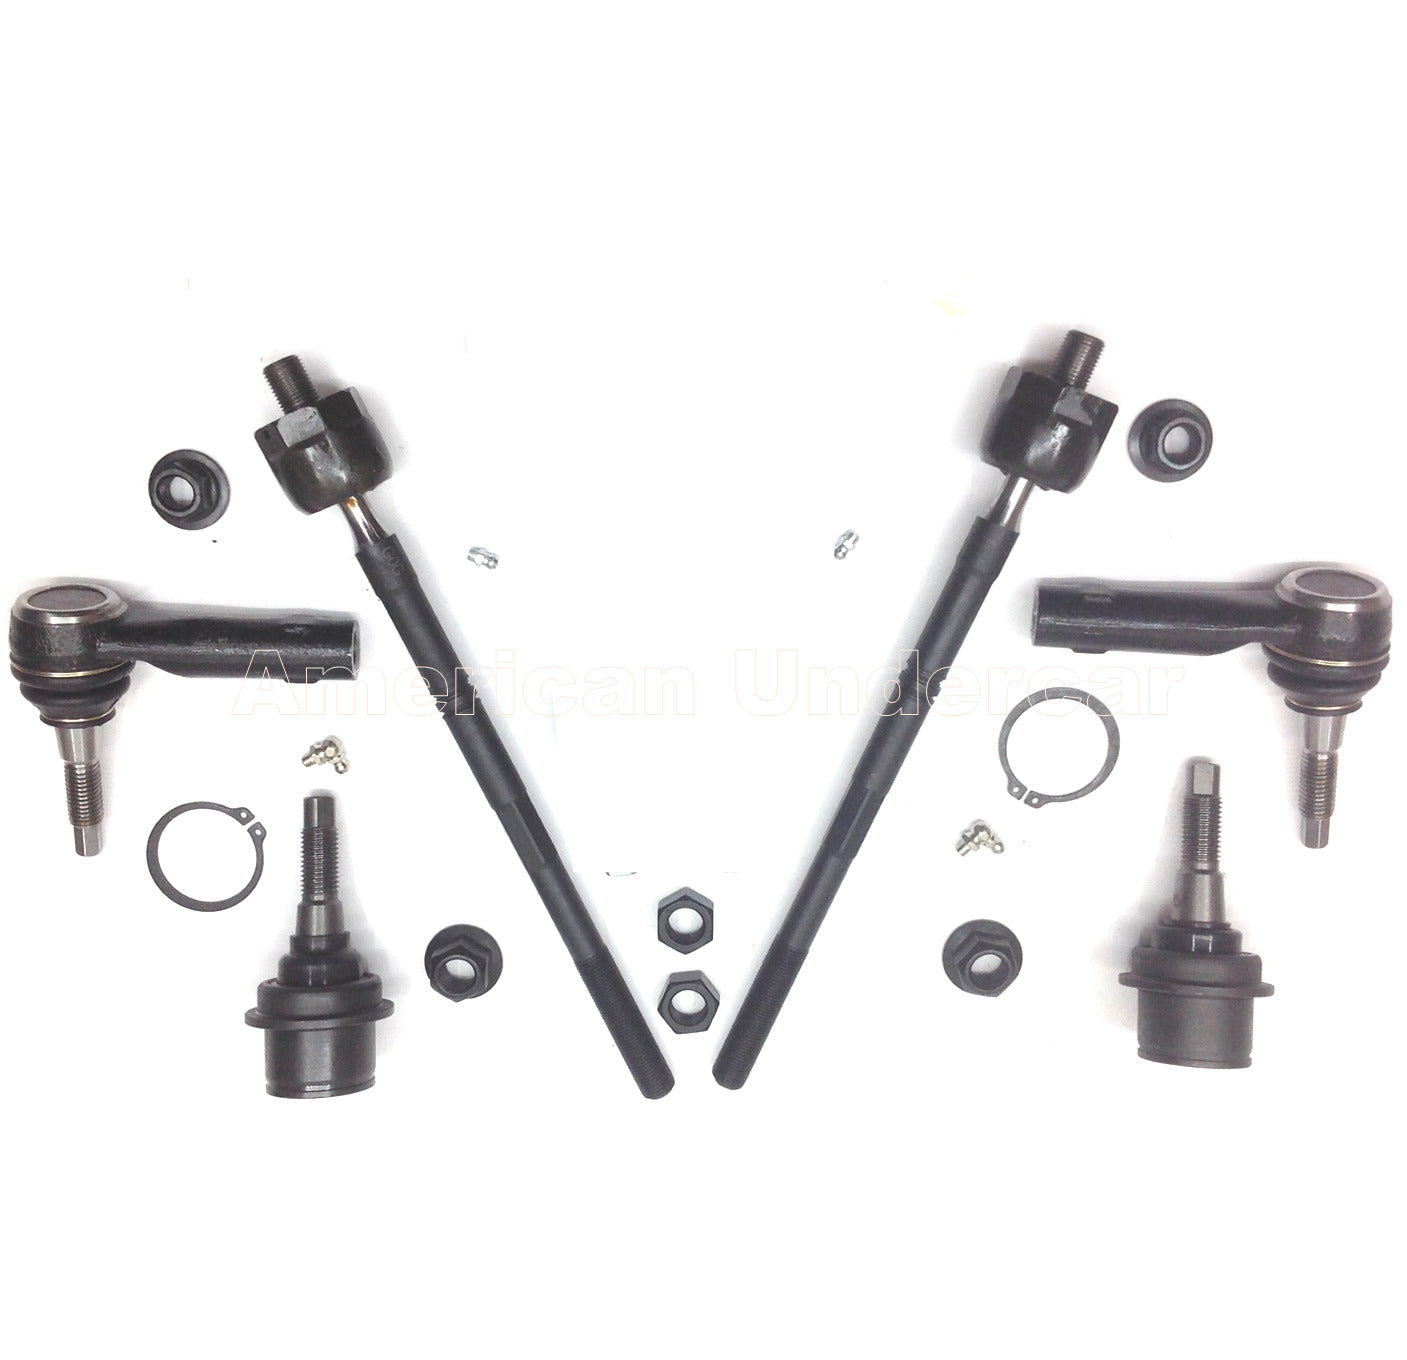 XRF Ball Joints Tie Rod Steering Suspension Kit for 2010-2013 Ford Transit Connect 2WD